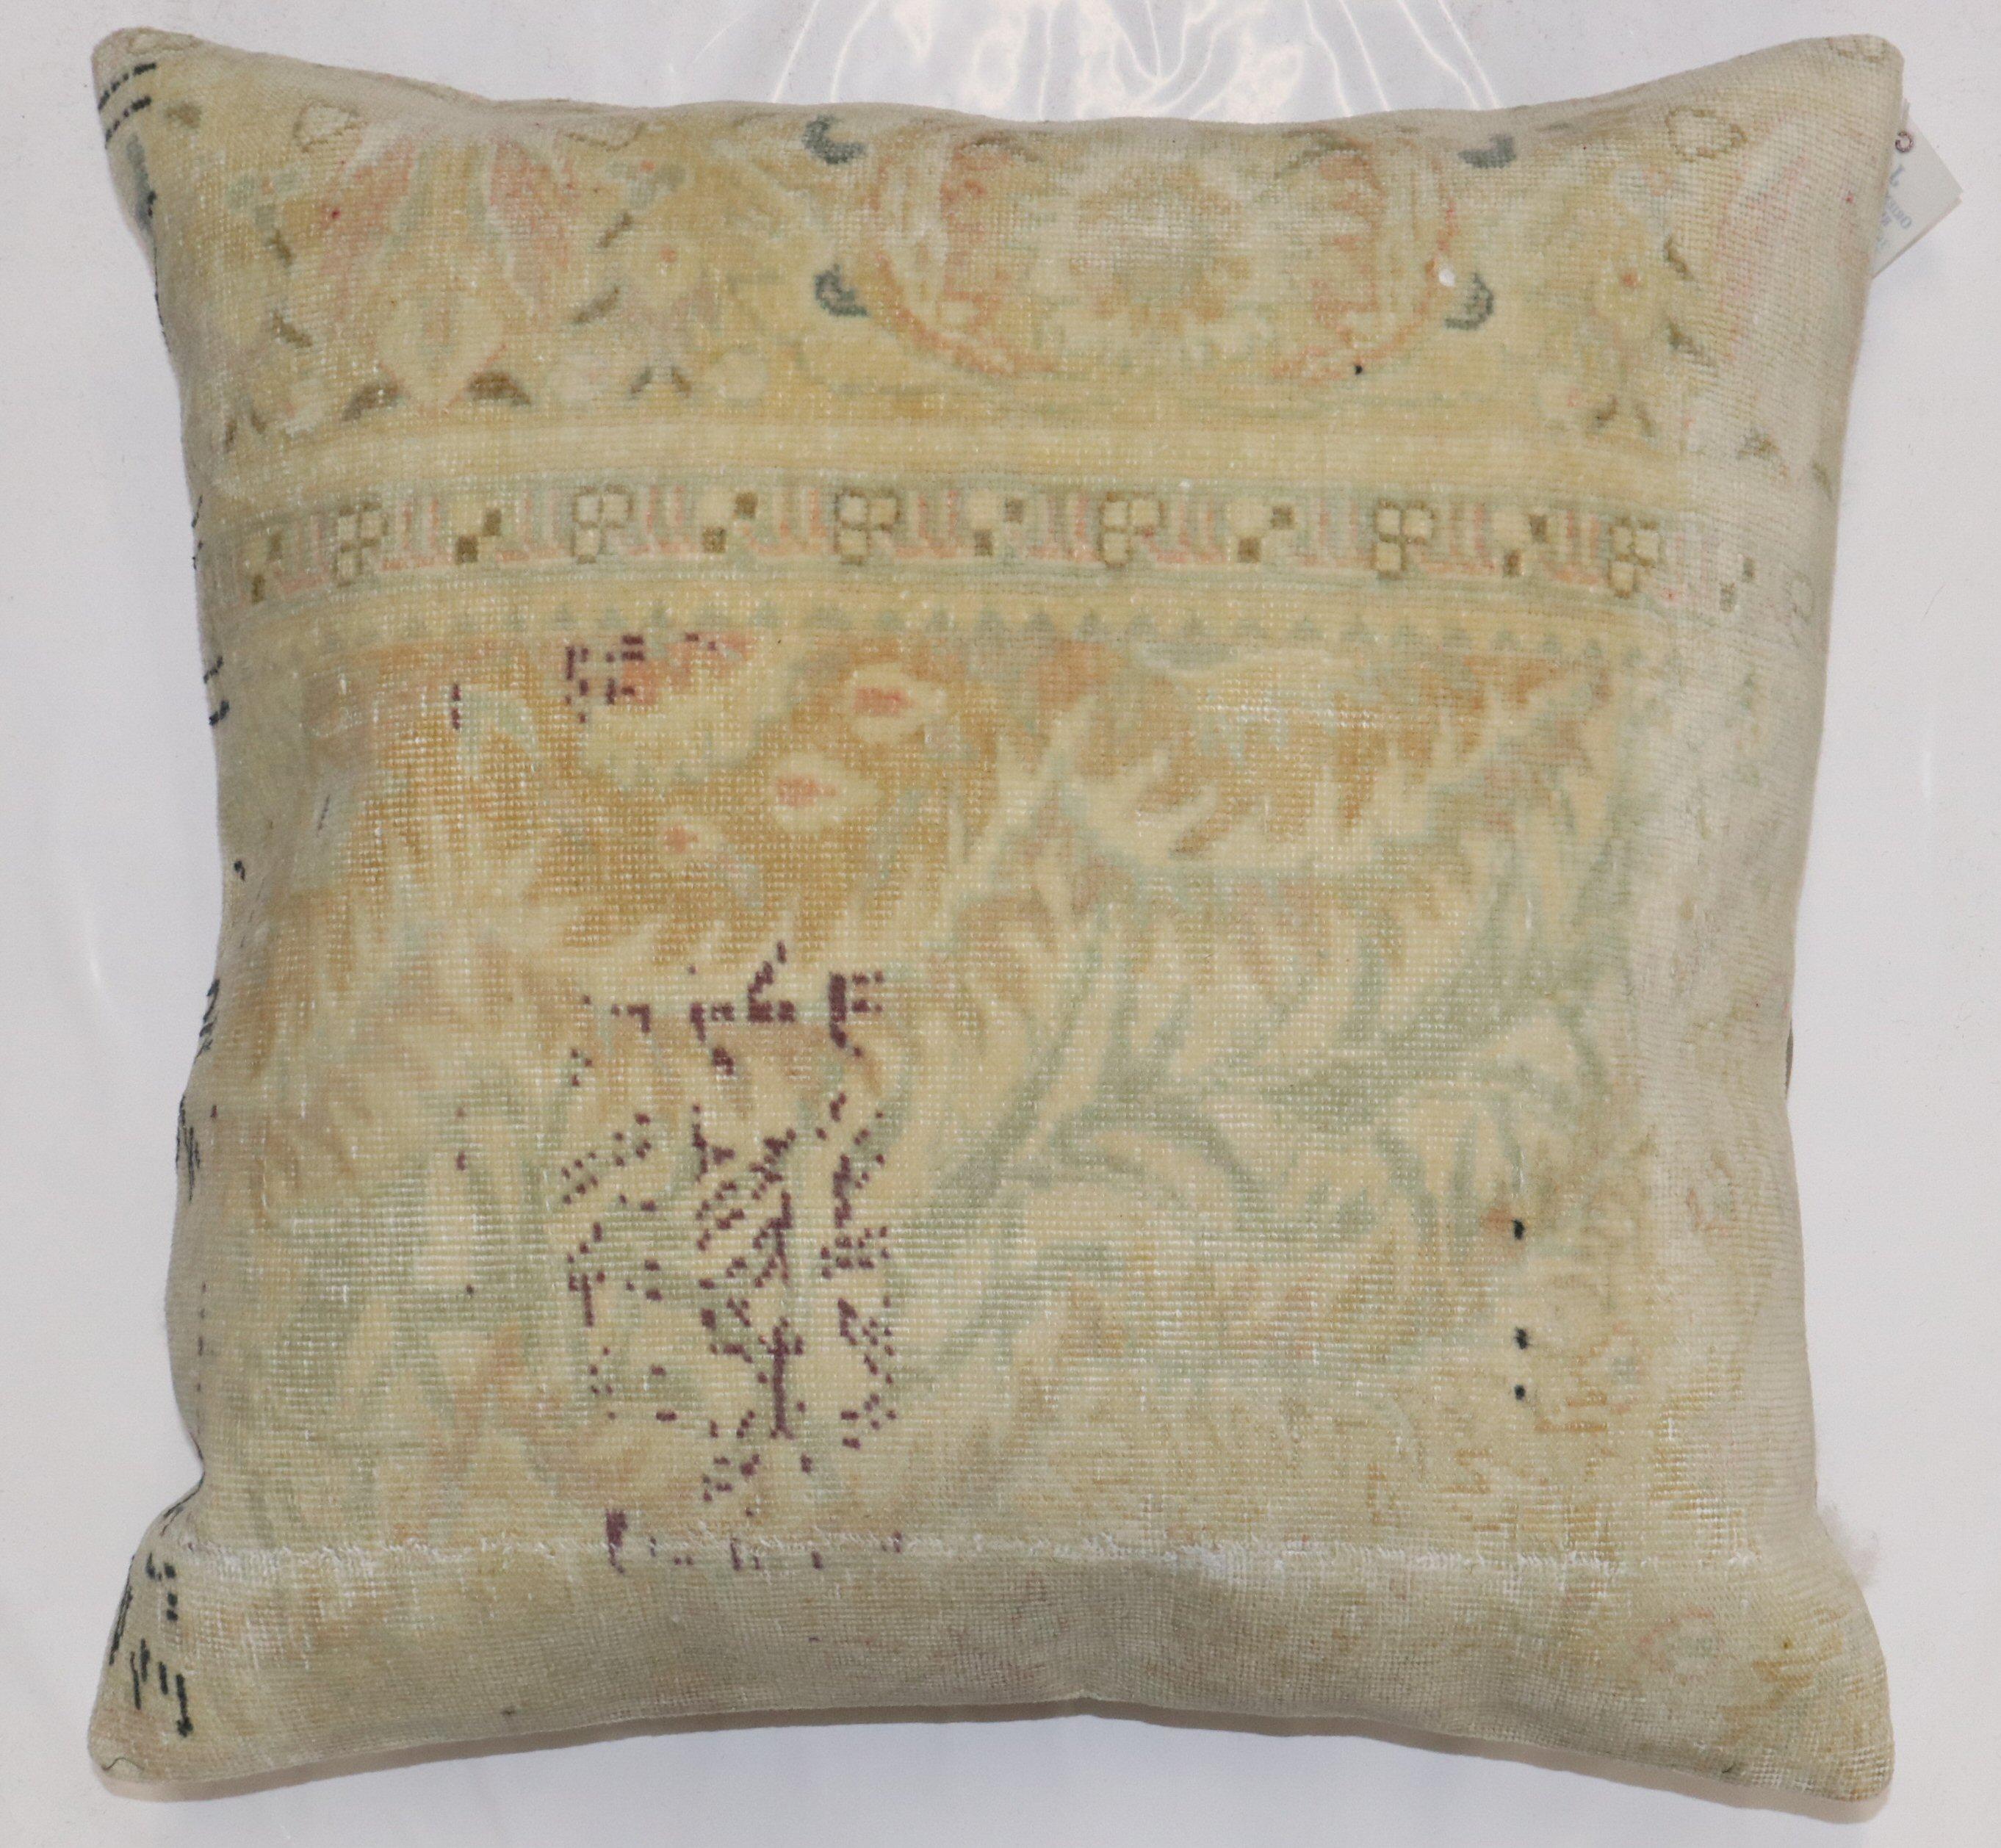 Pillow made from a mid-20th-century Turkish Keysari rug in a bolster size. zipper closure and polyfill insert provided

Measures: 23'' x 23''.